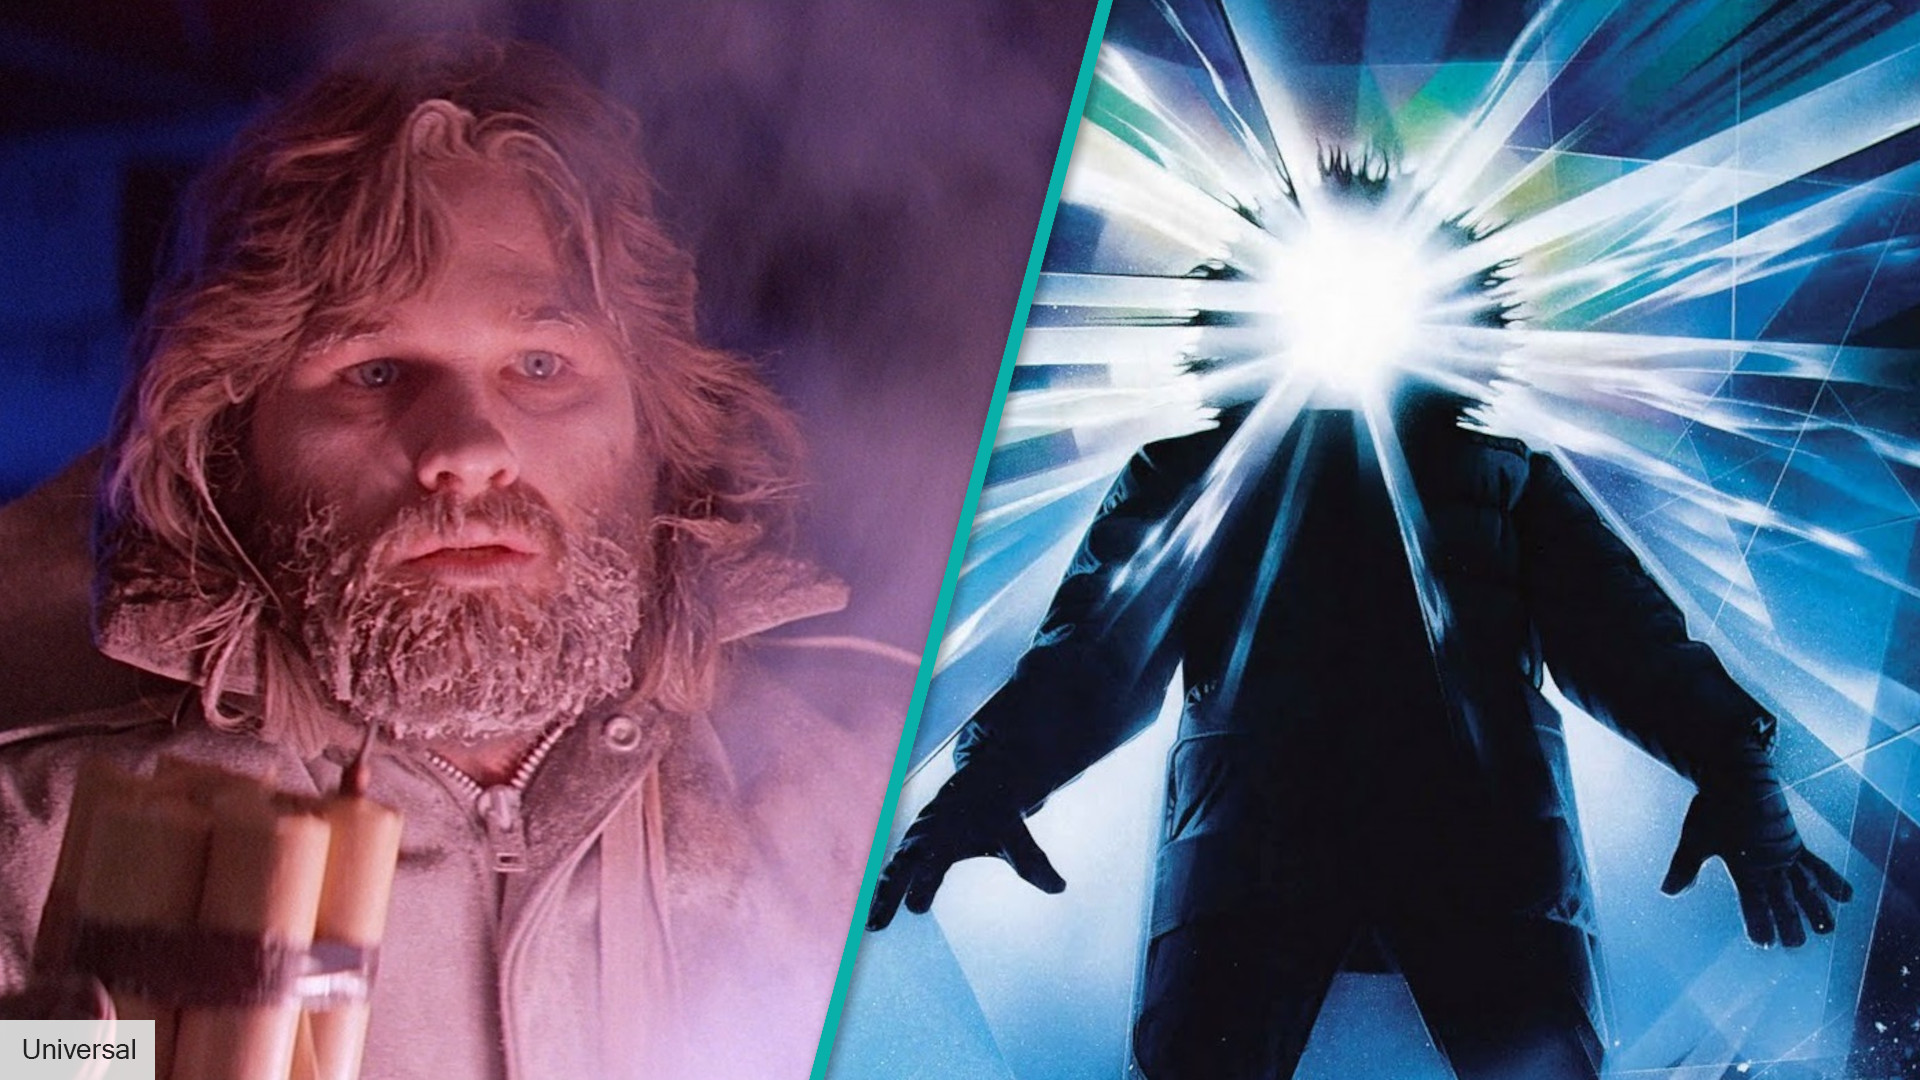 John Carpenter wants to make The Thing sequel